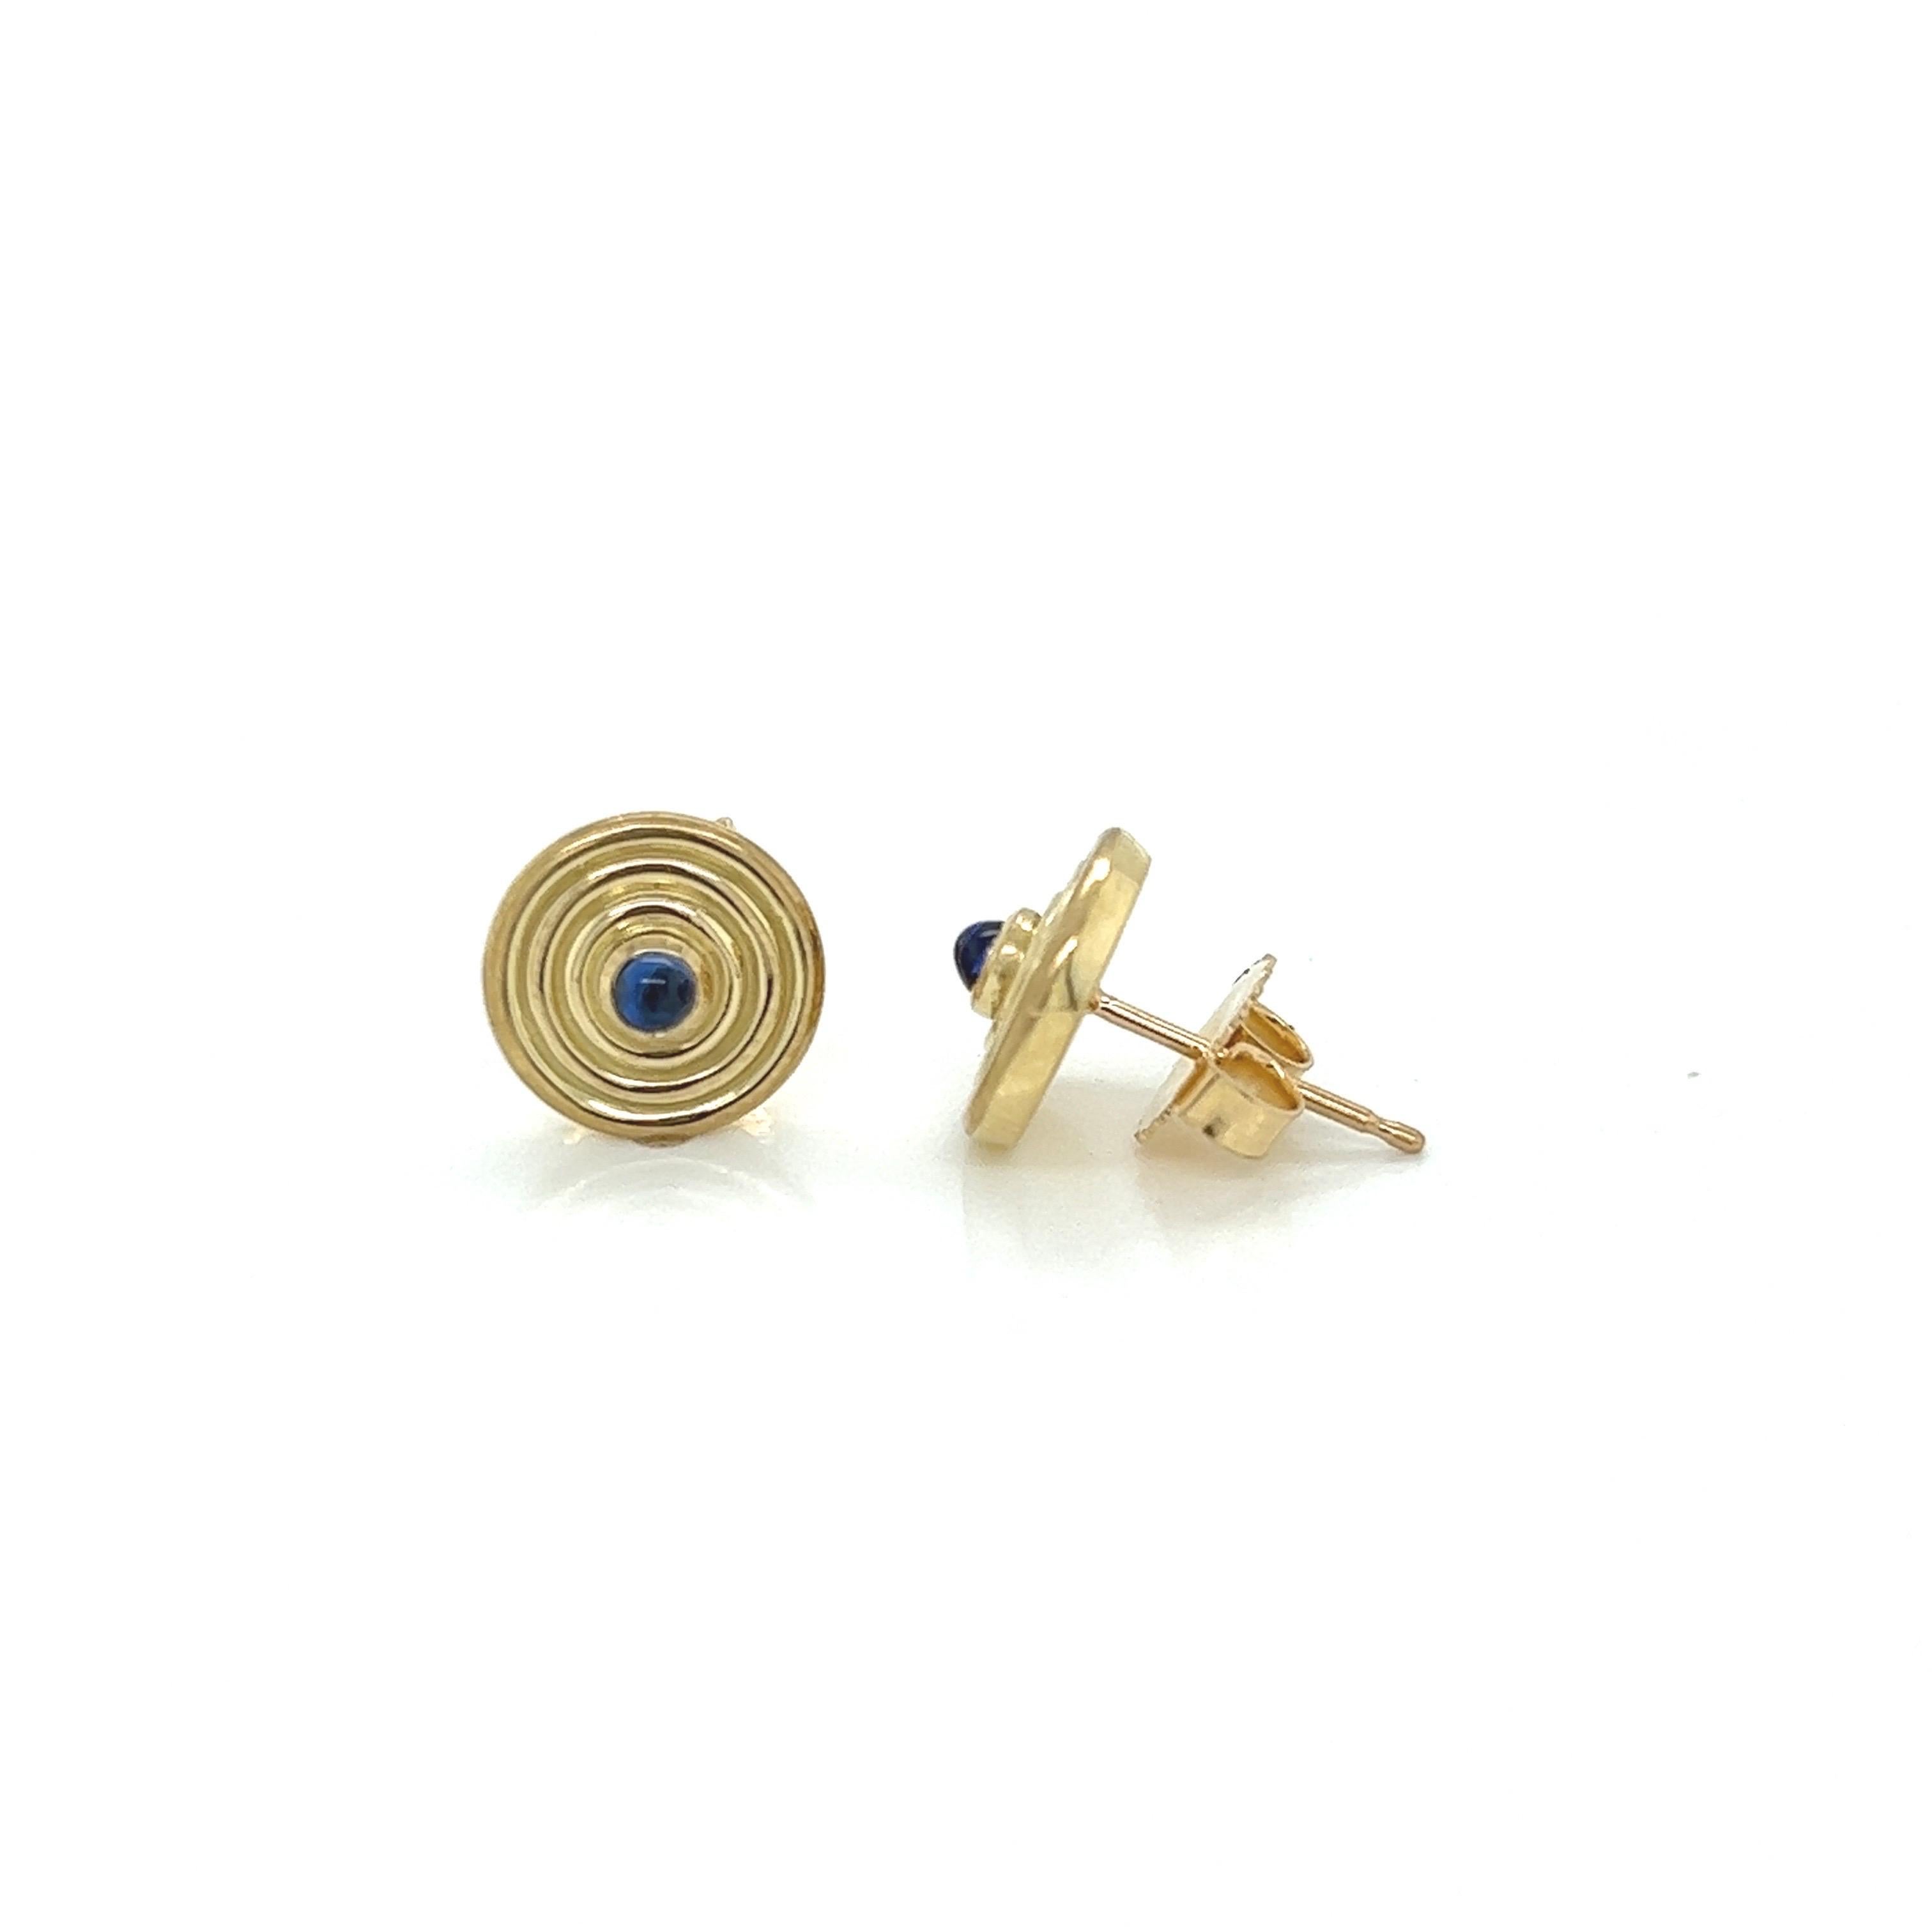 Art Deco 18k Yellow Gold Circular Multi Ring Stud Earrings with Cabochon Blue Sapphires For Sale